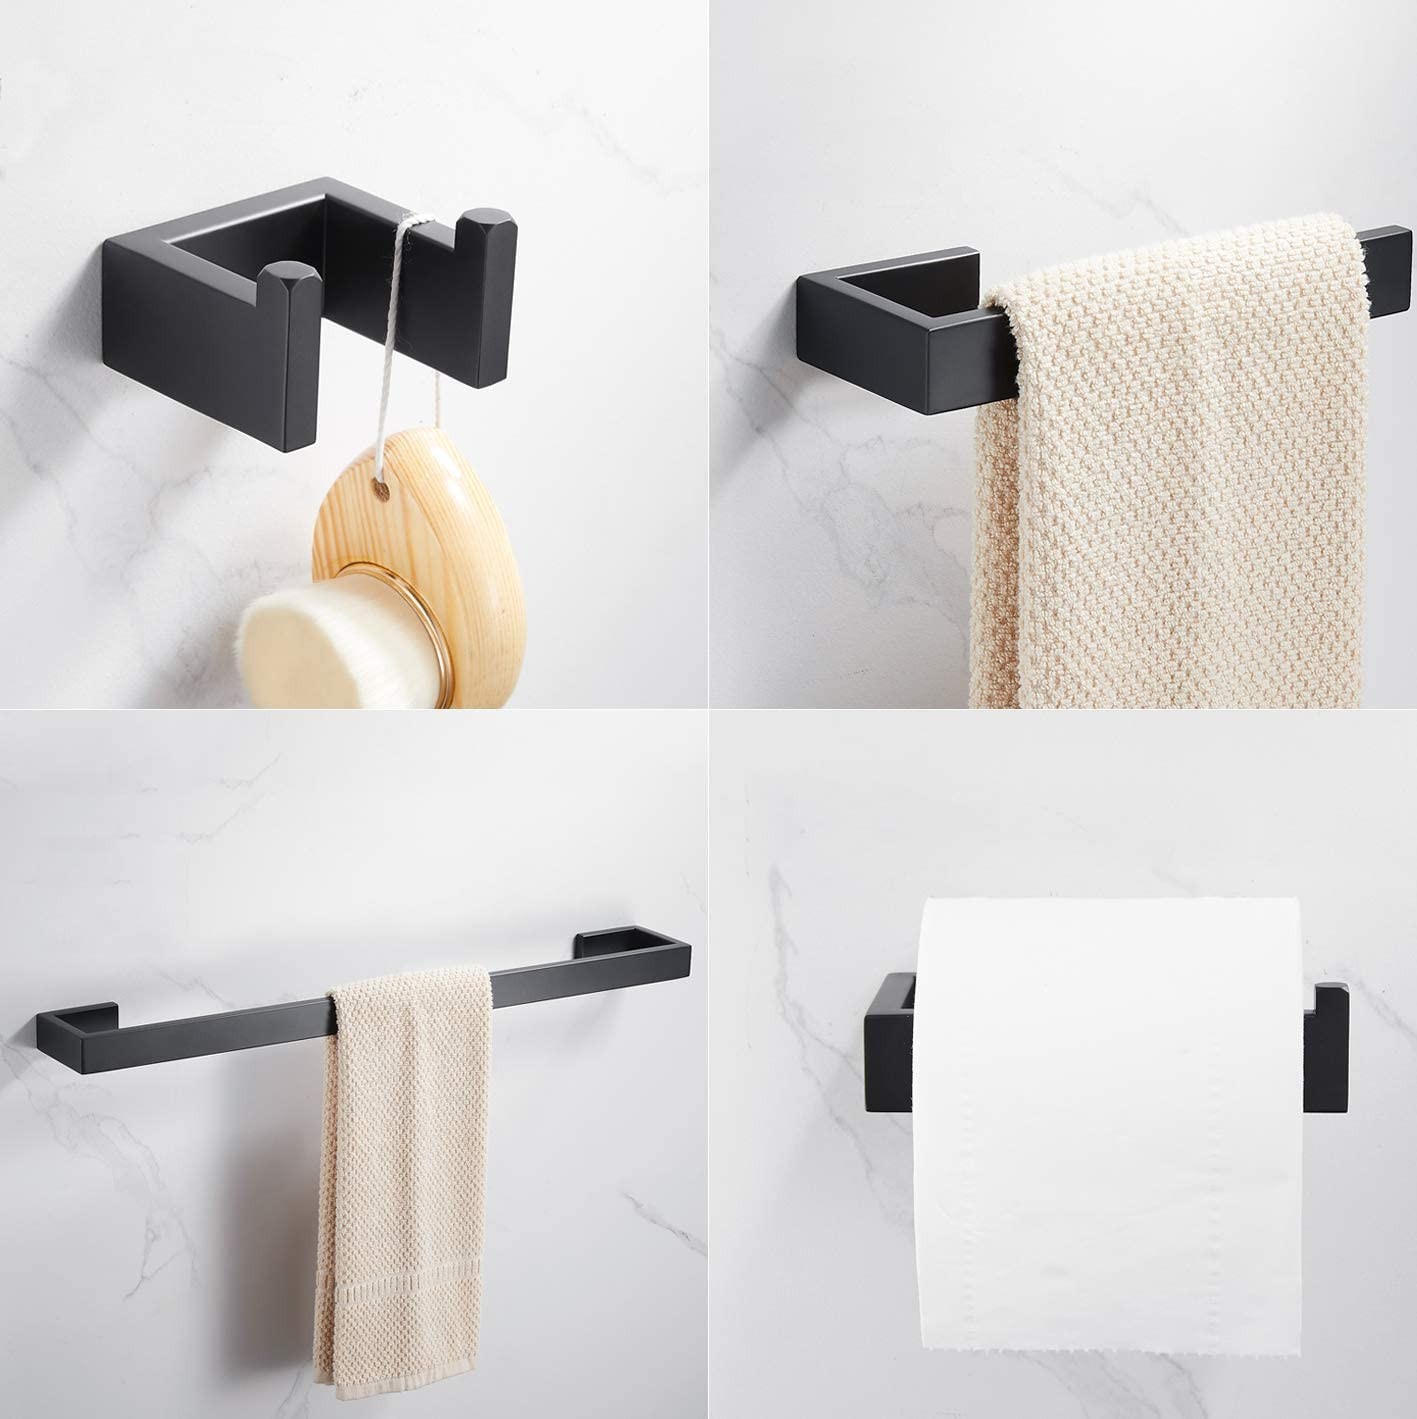 TAICUTE 4 Pack Bathroom Accessories Set Towel Bar Clothes Hook Toilet Paper Holder Wall Mount Stainless Steel Shower Hardware, Black